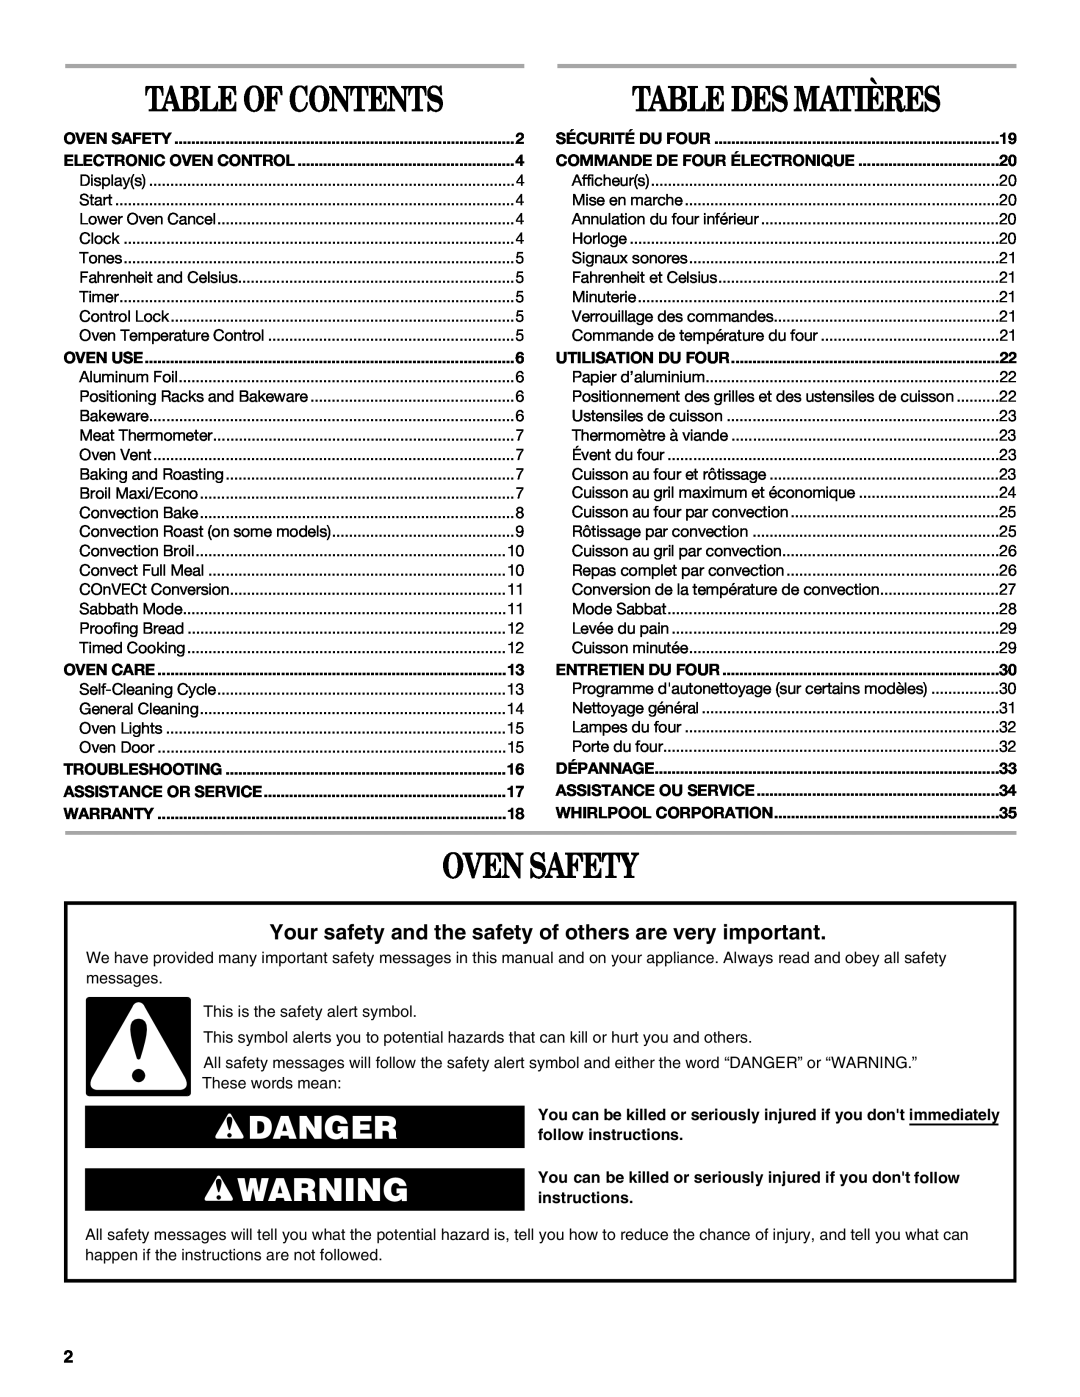 Whirlpool GSC309 manual Oven Safety, Danger, Your safety and the safety of others are very important, Table Des Matières 